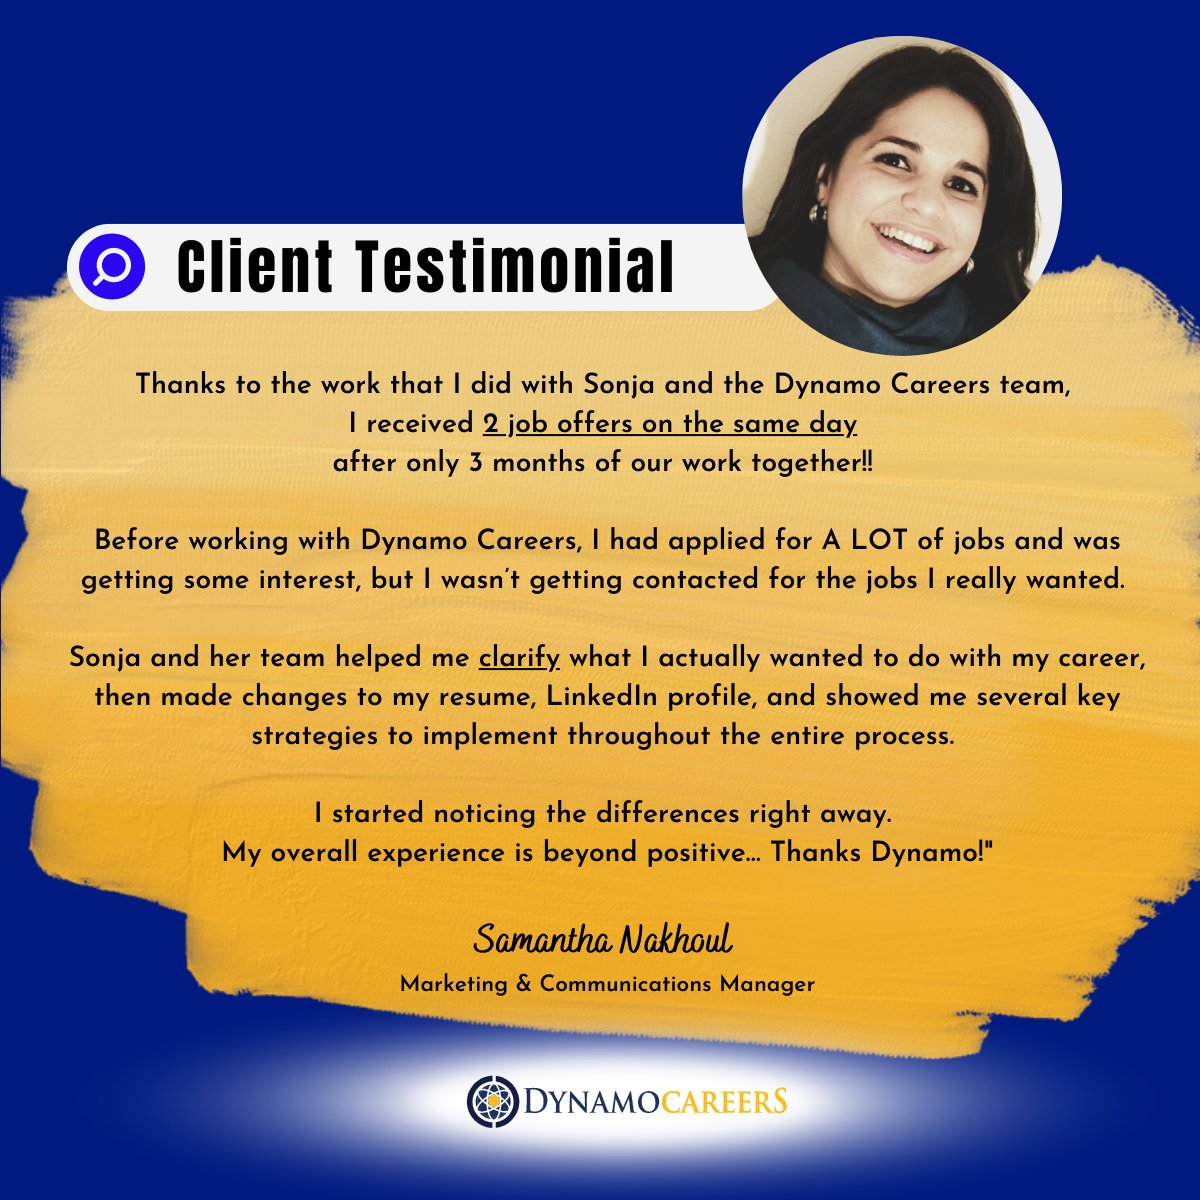 Unleashing My Full Potential: Samantha's Testimonial on Dynamo Careers 

Do you want clarification on what you really want to do to achieve your desired career path?

Get started now! Send us a DM.

Follow for more

#professional #careerdevelopment #careergoals #careerclarity